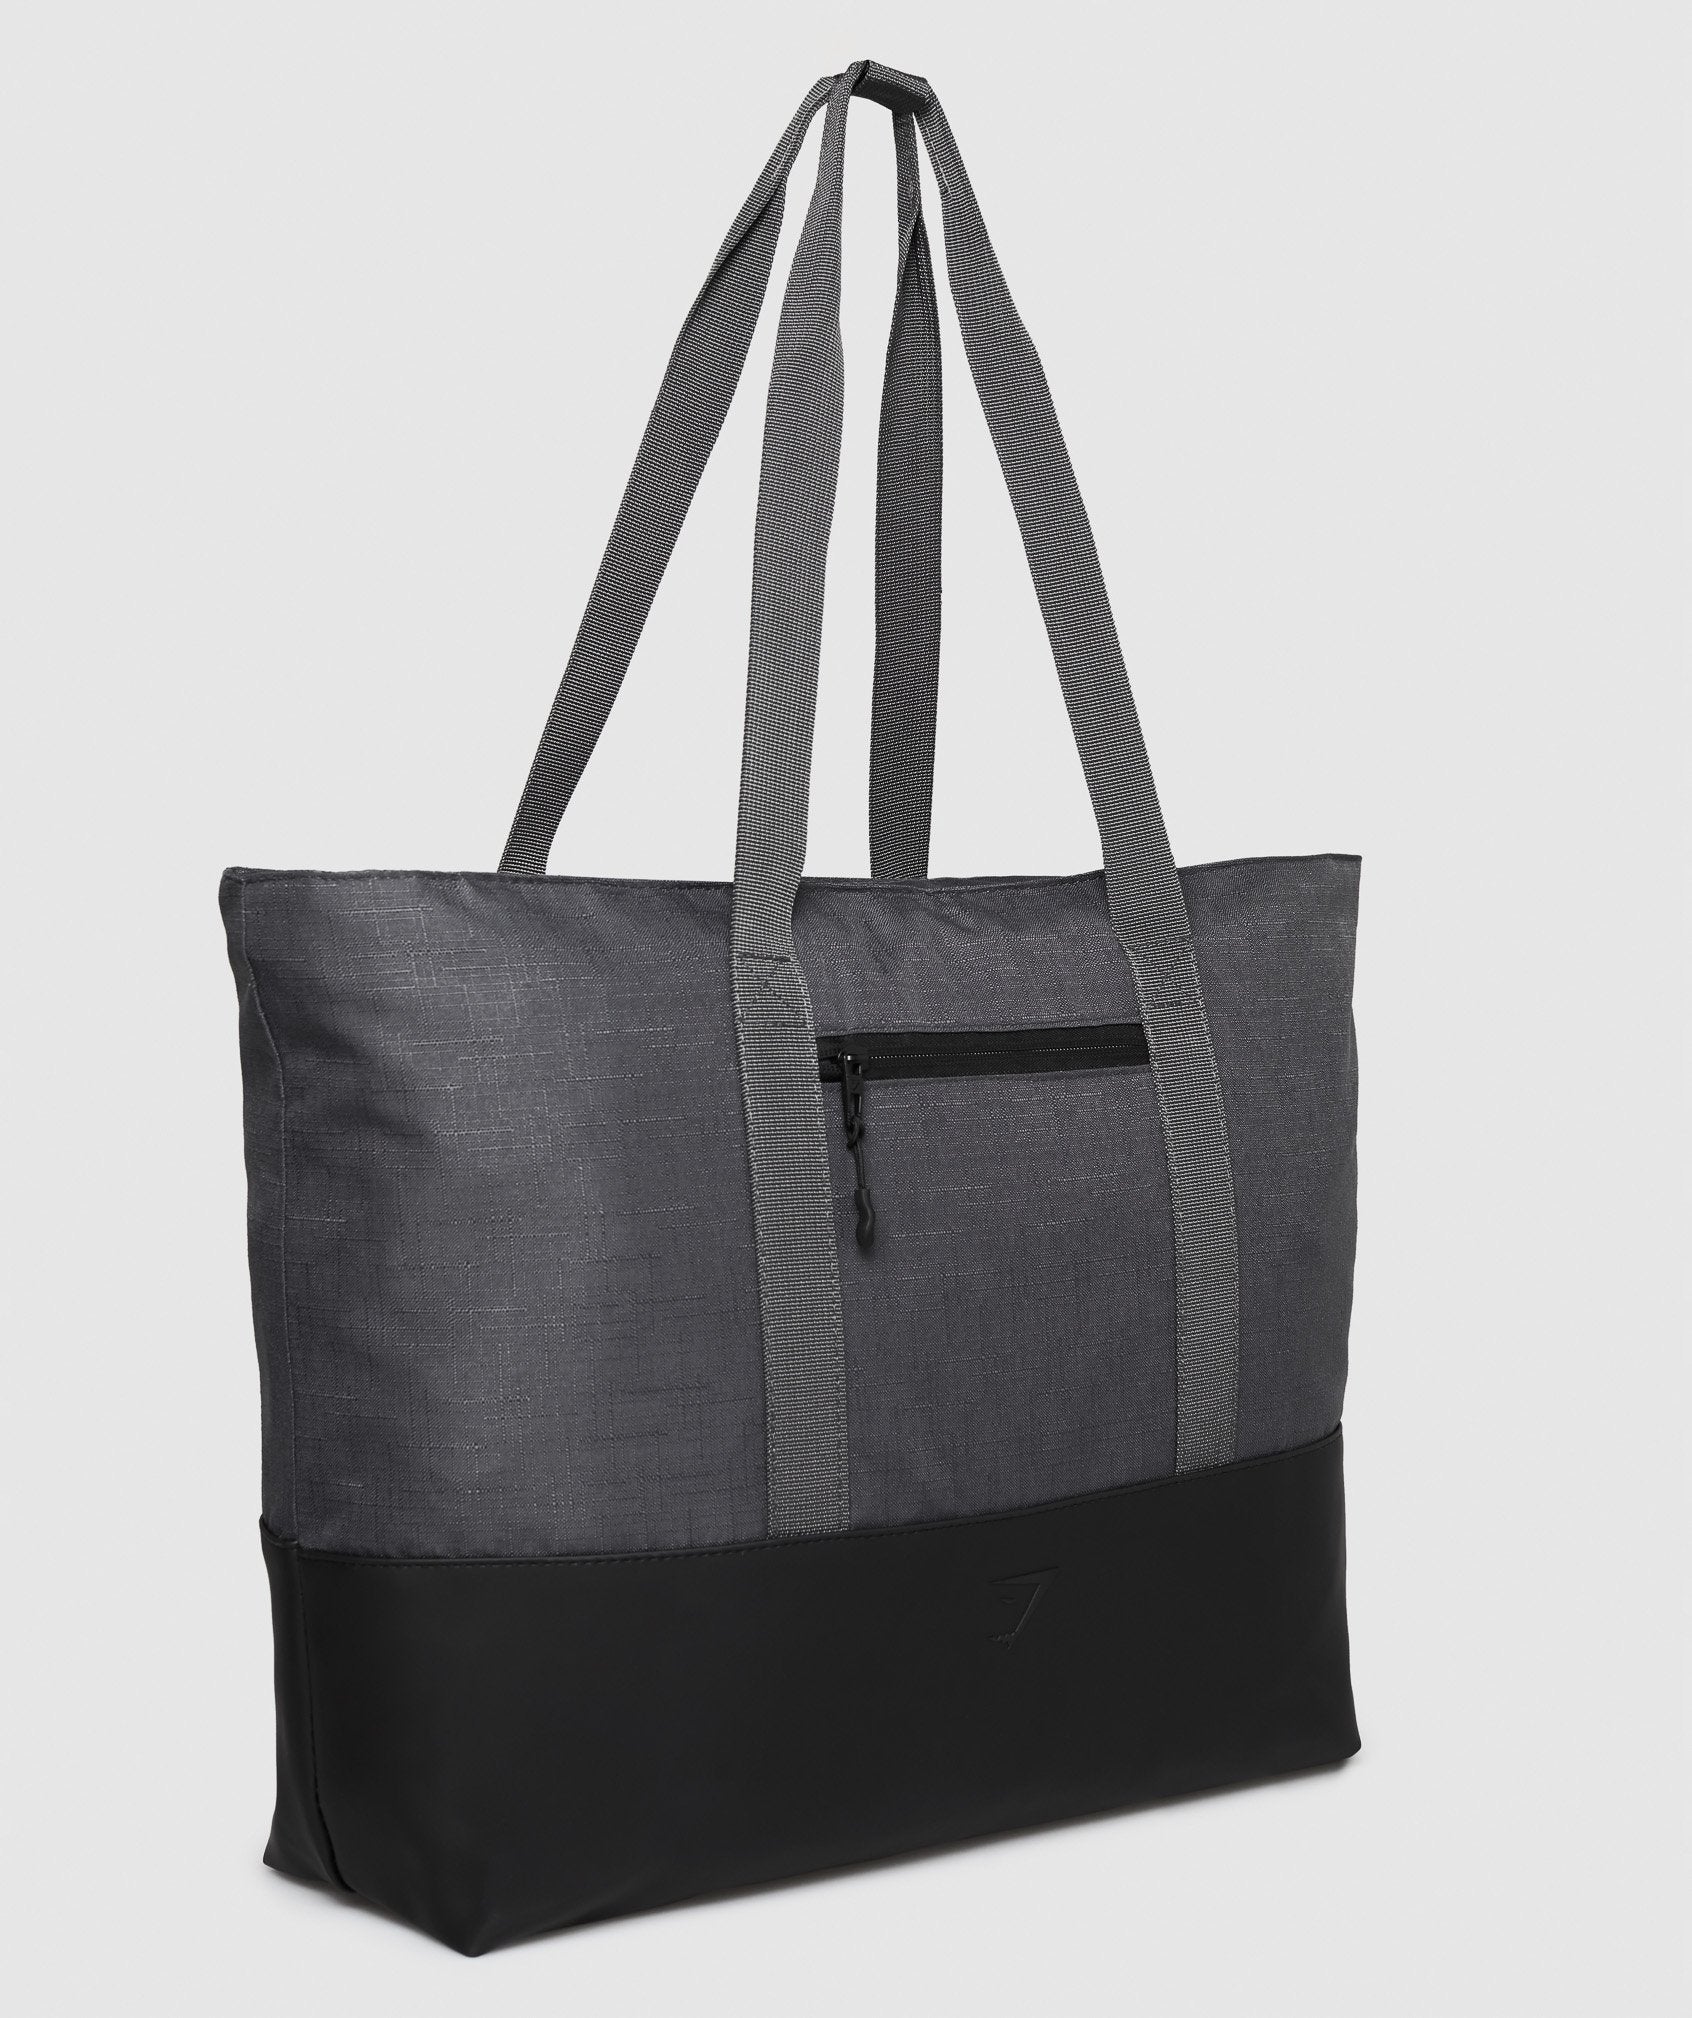 Tote Bag in Charcoal